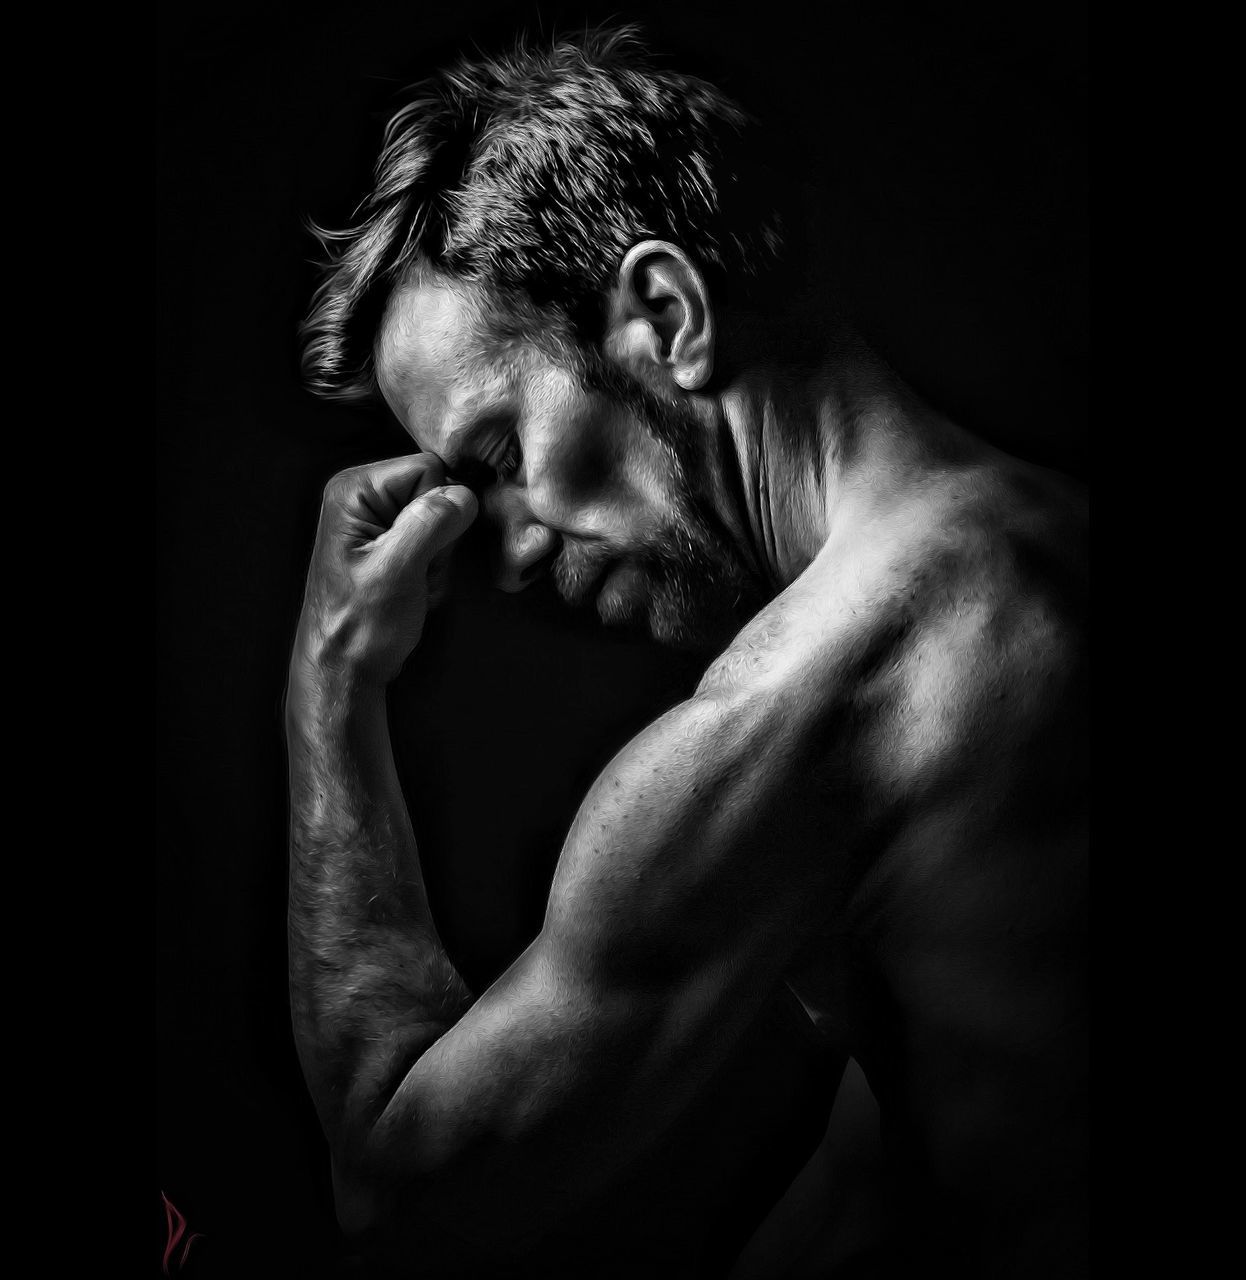 adult, black and white, one person, men, muscular build, black background, strength, monochrome photography, portrait, lifestyles, indoors, studio shot, black, monochrome, arm, hand, young adult, wellbeing, athlete, waist up, exercising, emotion, sadness, person, copy space, human muscle, sports, darkness, bodybuilding, macho, dark